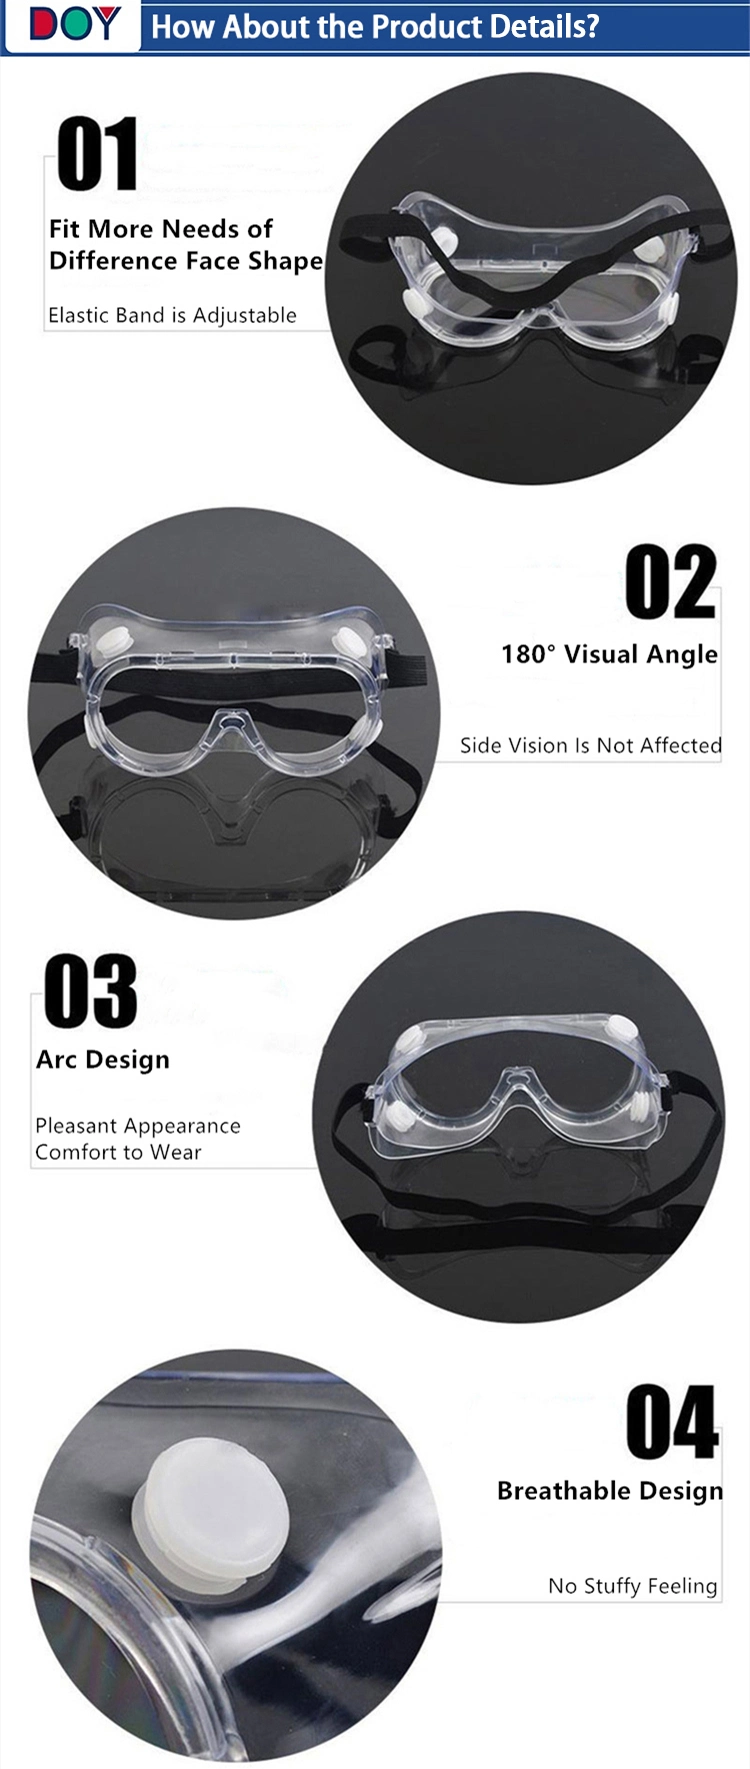 Wholesale Safety Goggles Anti-Fog Anti-Virus Protective Goggles with Elastic Band